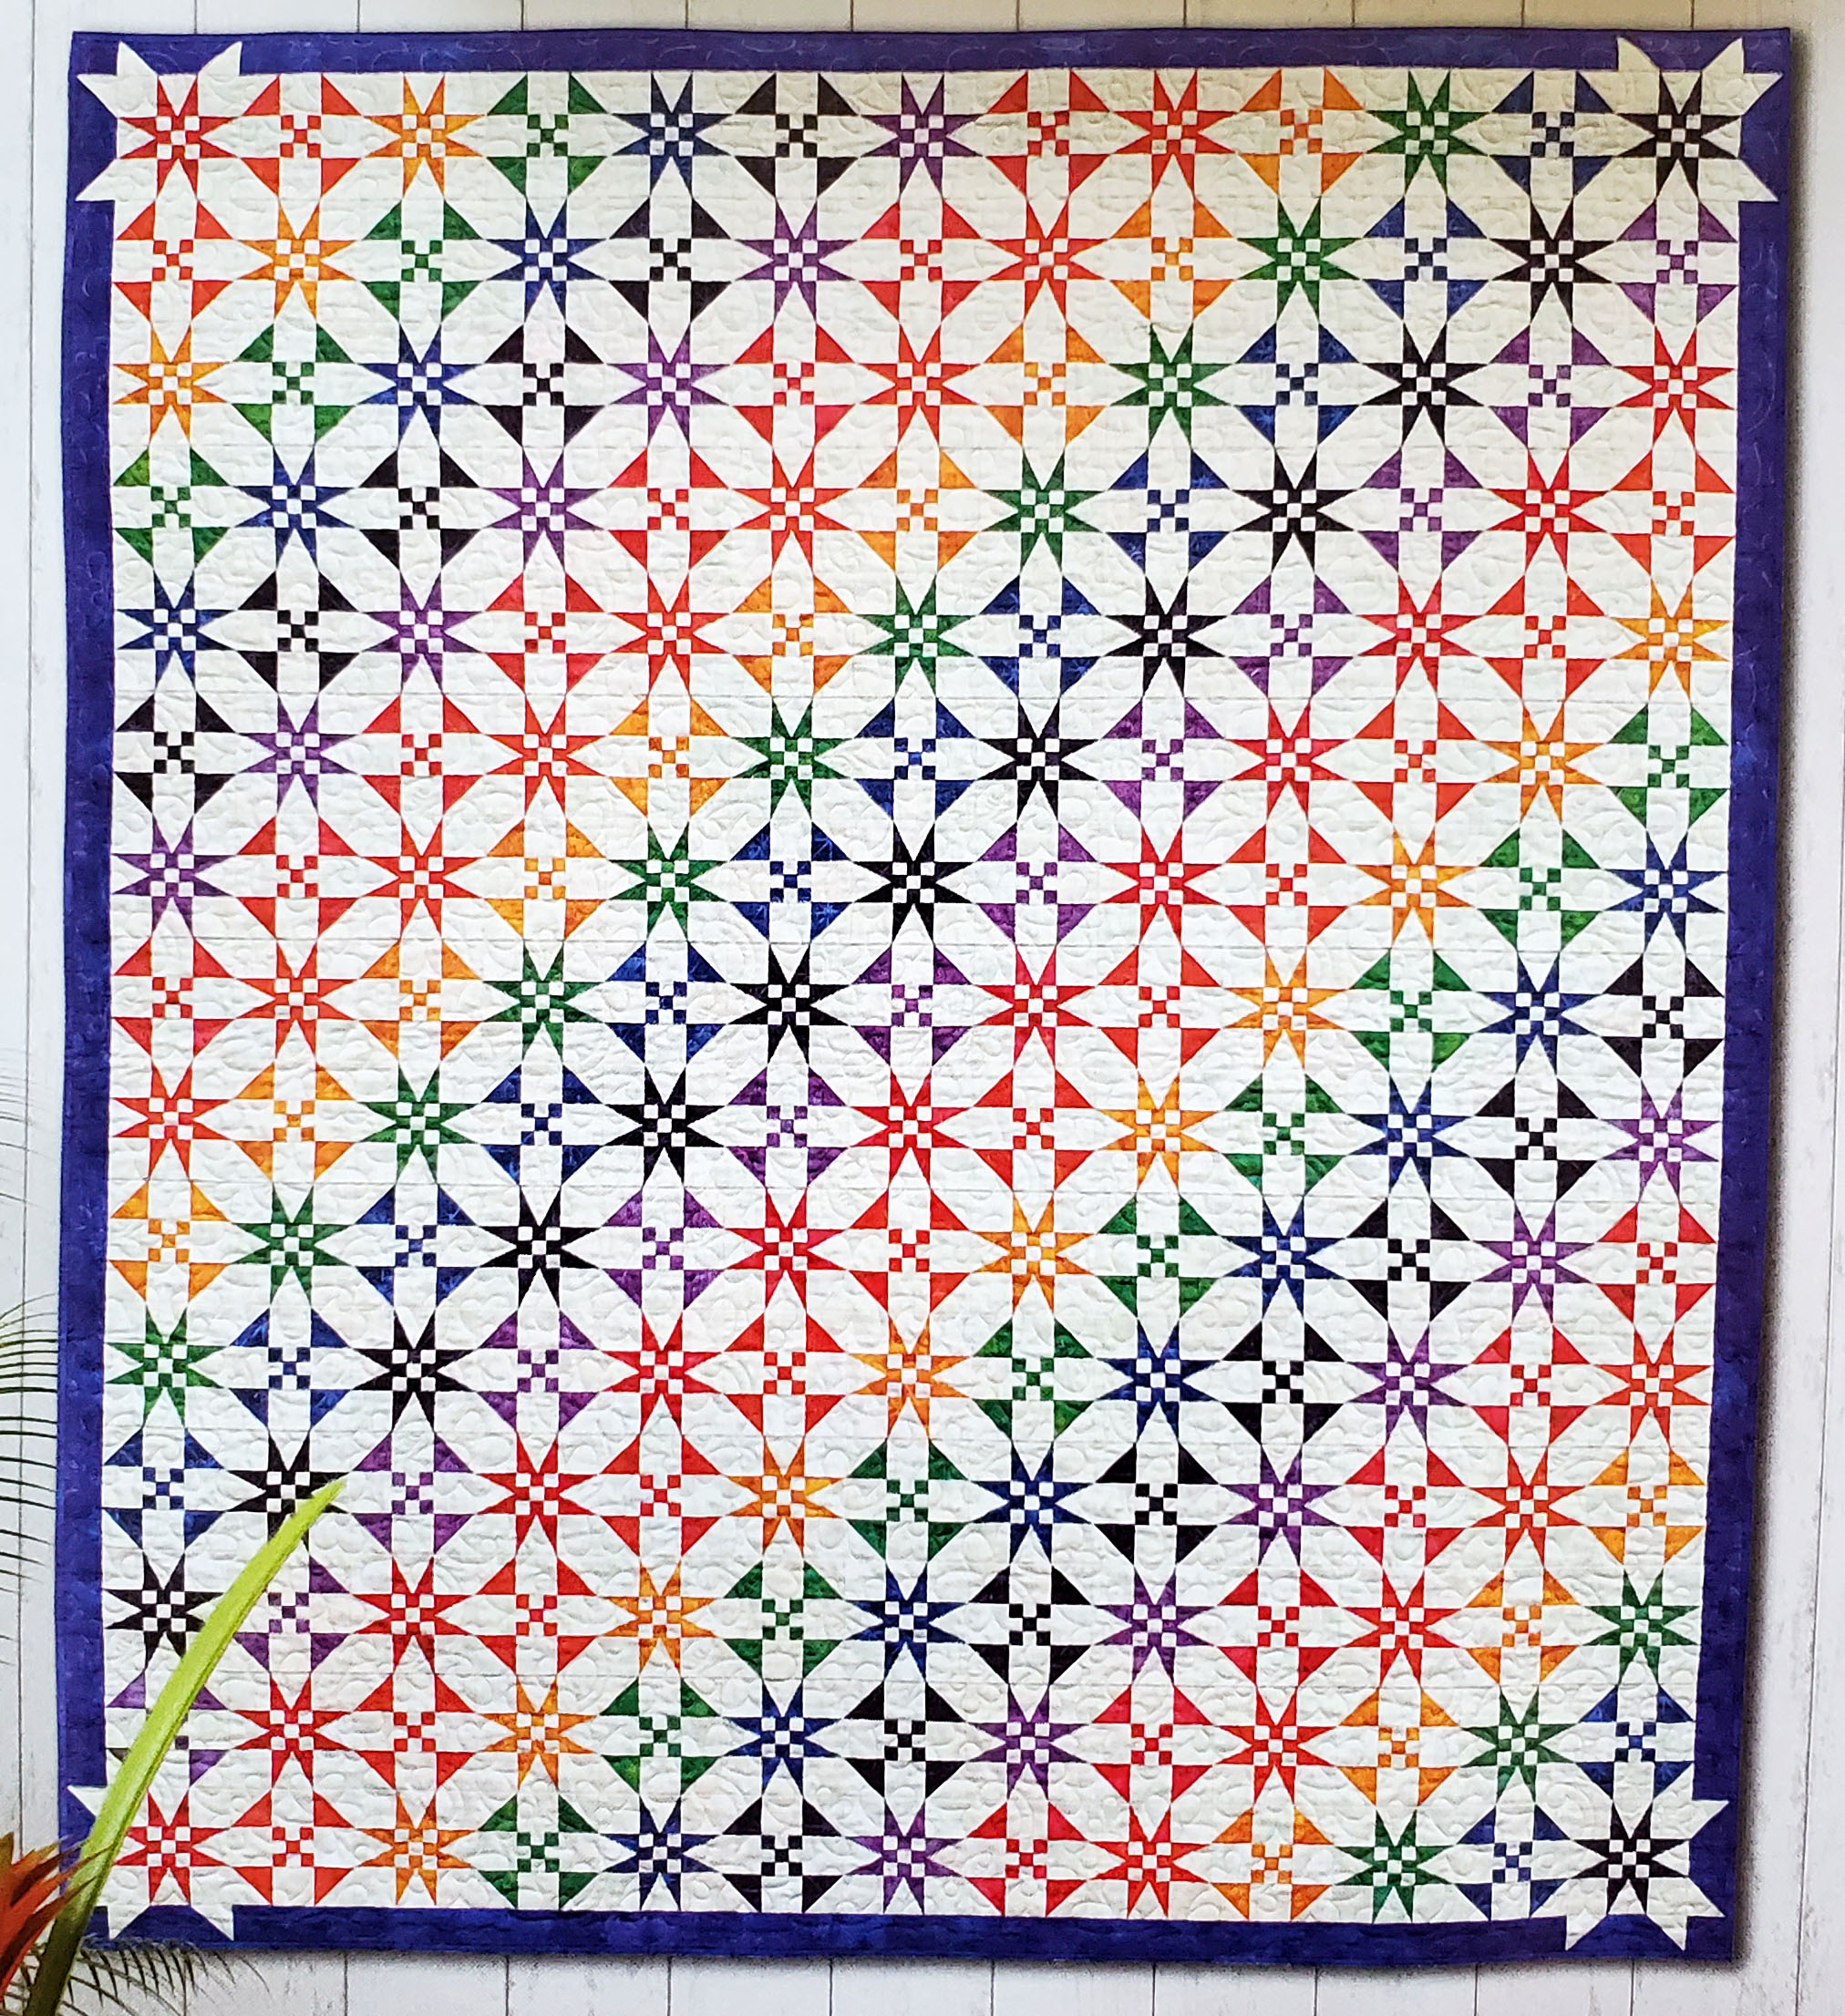 Shelley Scott Tobisch  You can see Shelly's gorgeous “Here Comes the Sun” quilt in the September issue of American Quilter! We love seeing EQ users in magazines! Find the pattern and Shelley’s tips in the magazine.  Photo credit: American Quilter Magazine